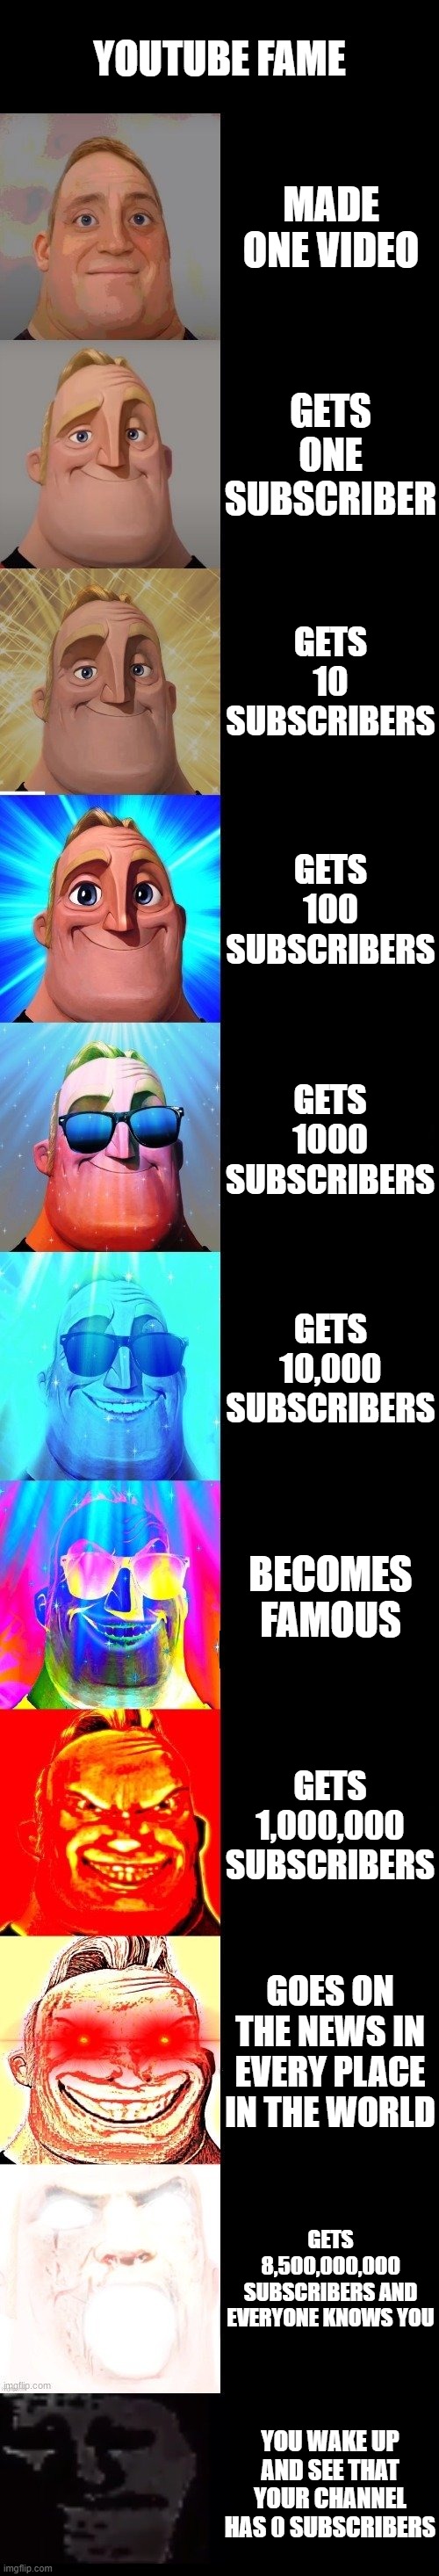 Youtube fame be like | YOUTUBE FAME; MADE ONE VIDEO; GETS ONE SUBSCRIBER; GETS 10 SUBSCRIBERS; GETS 100 SUBSCRIBERS; GETS 1000 SUBSCRIBERS; GETS 10,000 SUBSCRIBERS; BECOMES FAMOUS; GETS 1,000,000 SUBSCRIBERS; GOES ON THE NEWS IN EVERY PLACE IN THE WORLD; GETS 8,500,000,000 SUBSCRIBERS AND EVERYONE KNOWS YOU; YOU WAKE UP AND SEE THAT YOUR CHANNEL HAS 0 SUBSCRIBERS | image tagged in mr incredible becoming canny and instantly becomes uncanny | made w/ Imgflip meme maker